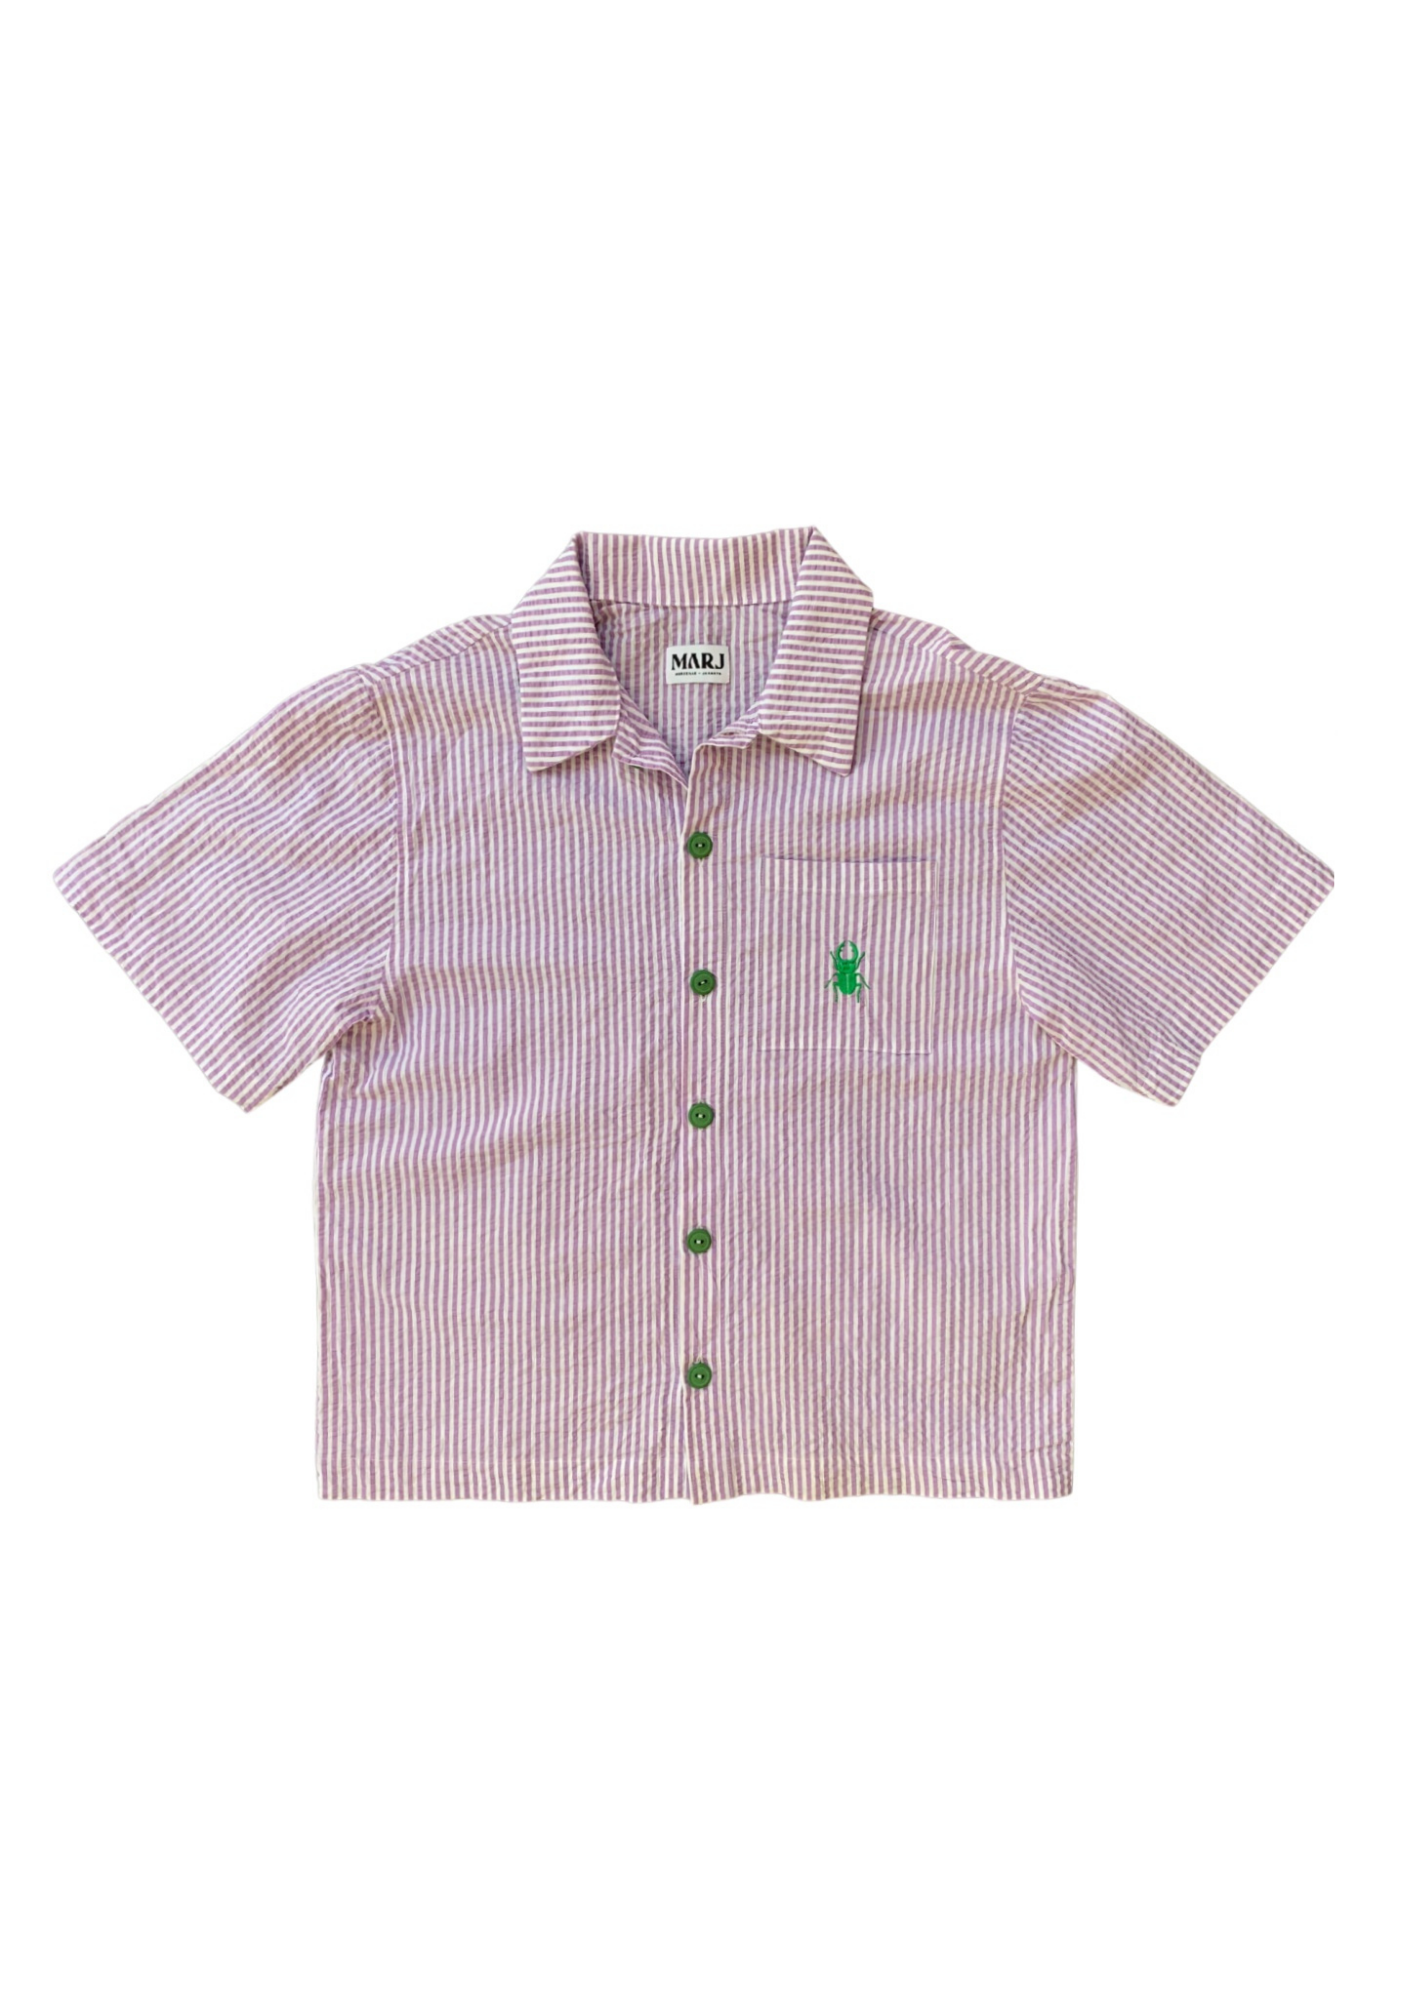 MARJ embroidered short sleeved shirt in lilac cotton seersucker upycling 